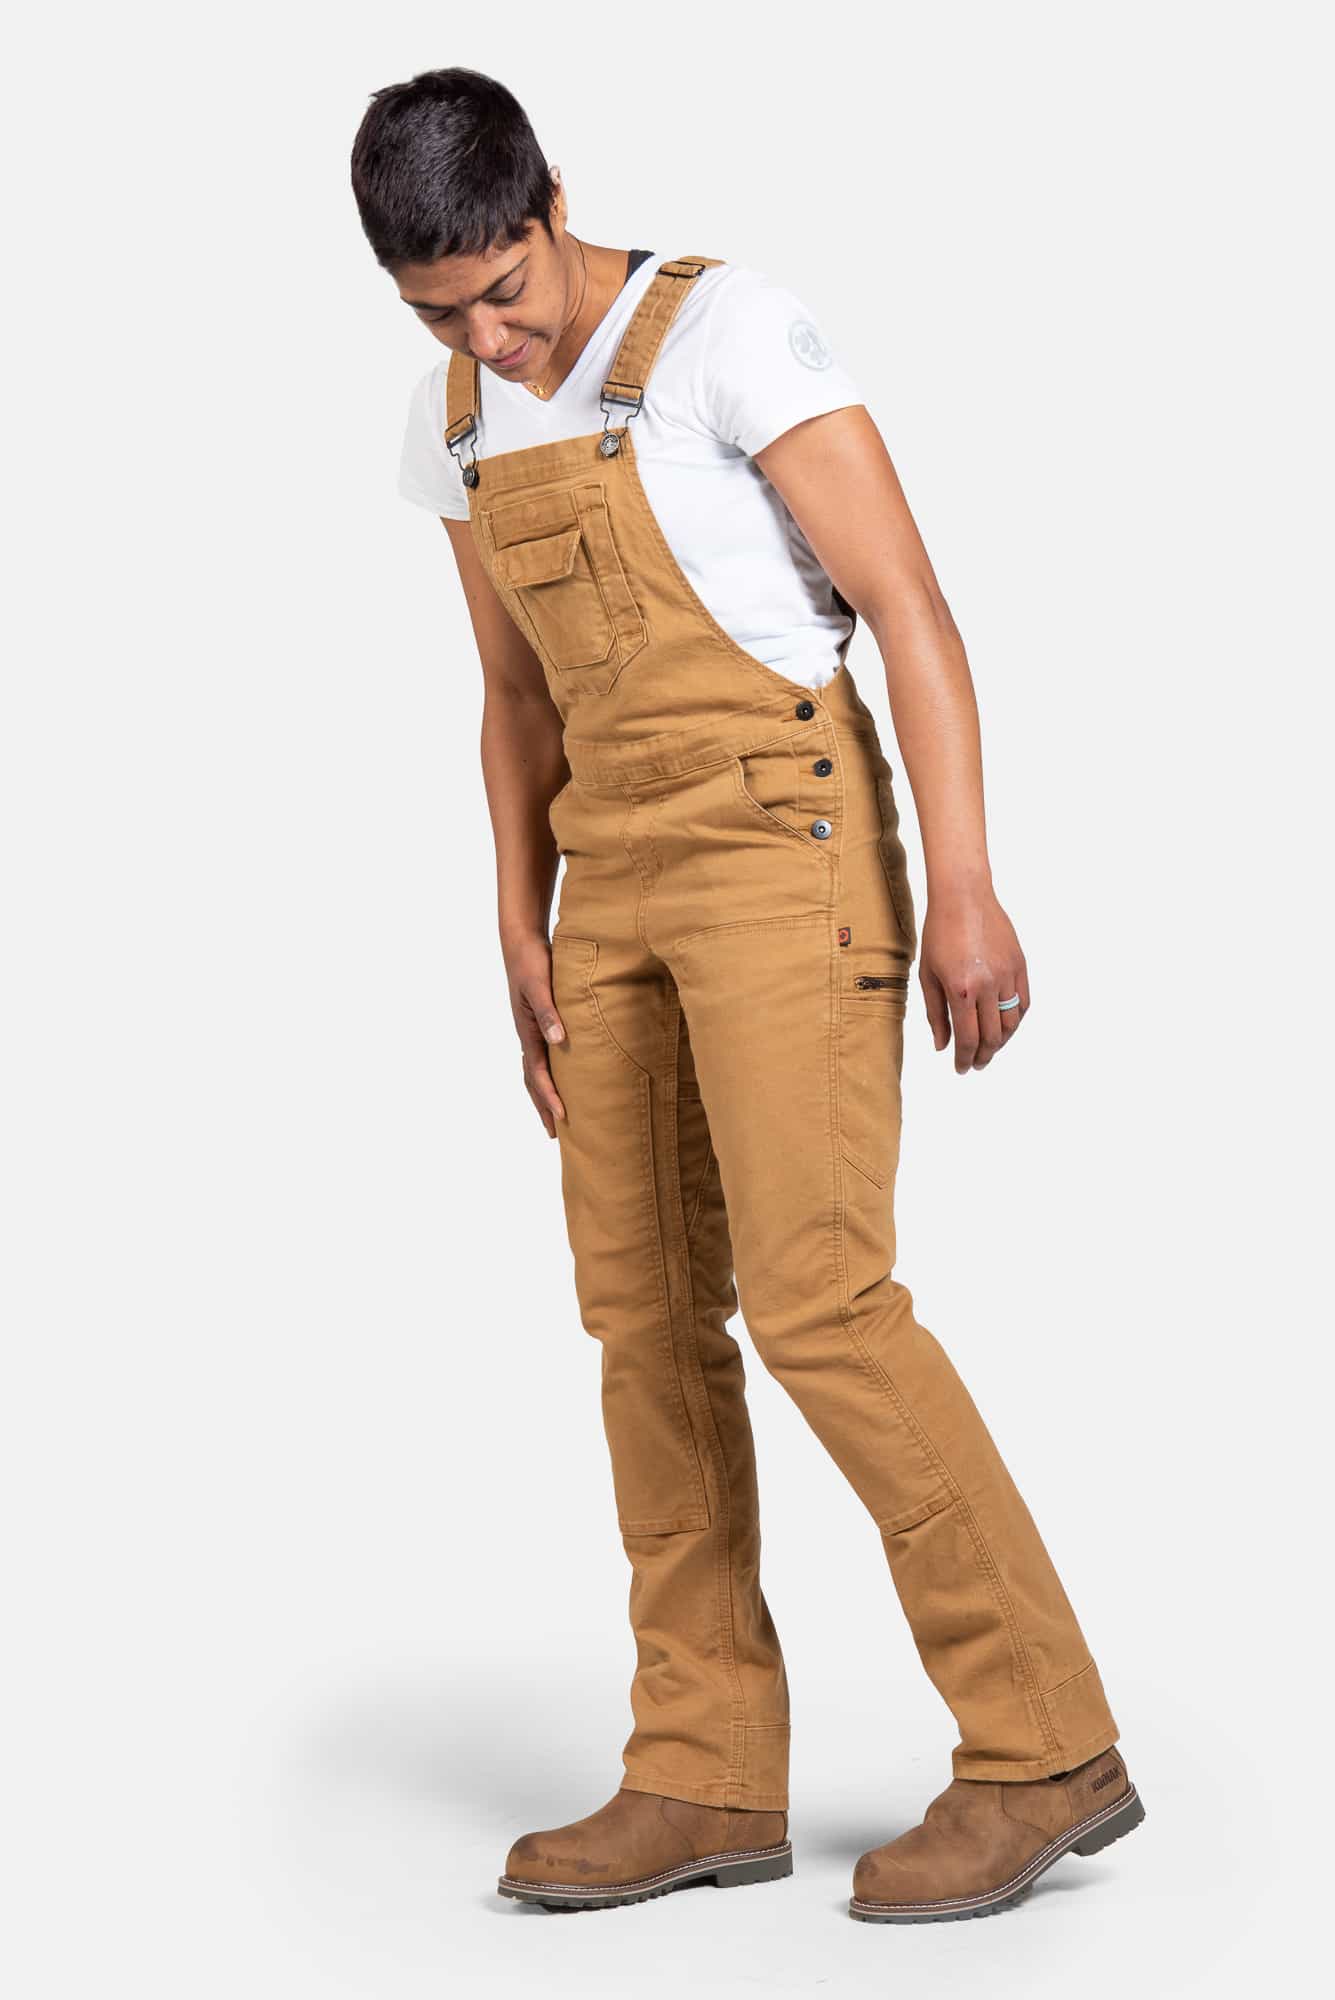 Freshley Overalls in Saddle Brown Canvas Work Pants Dovetail Workwear